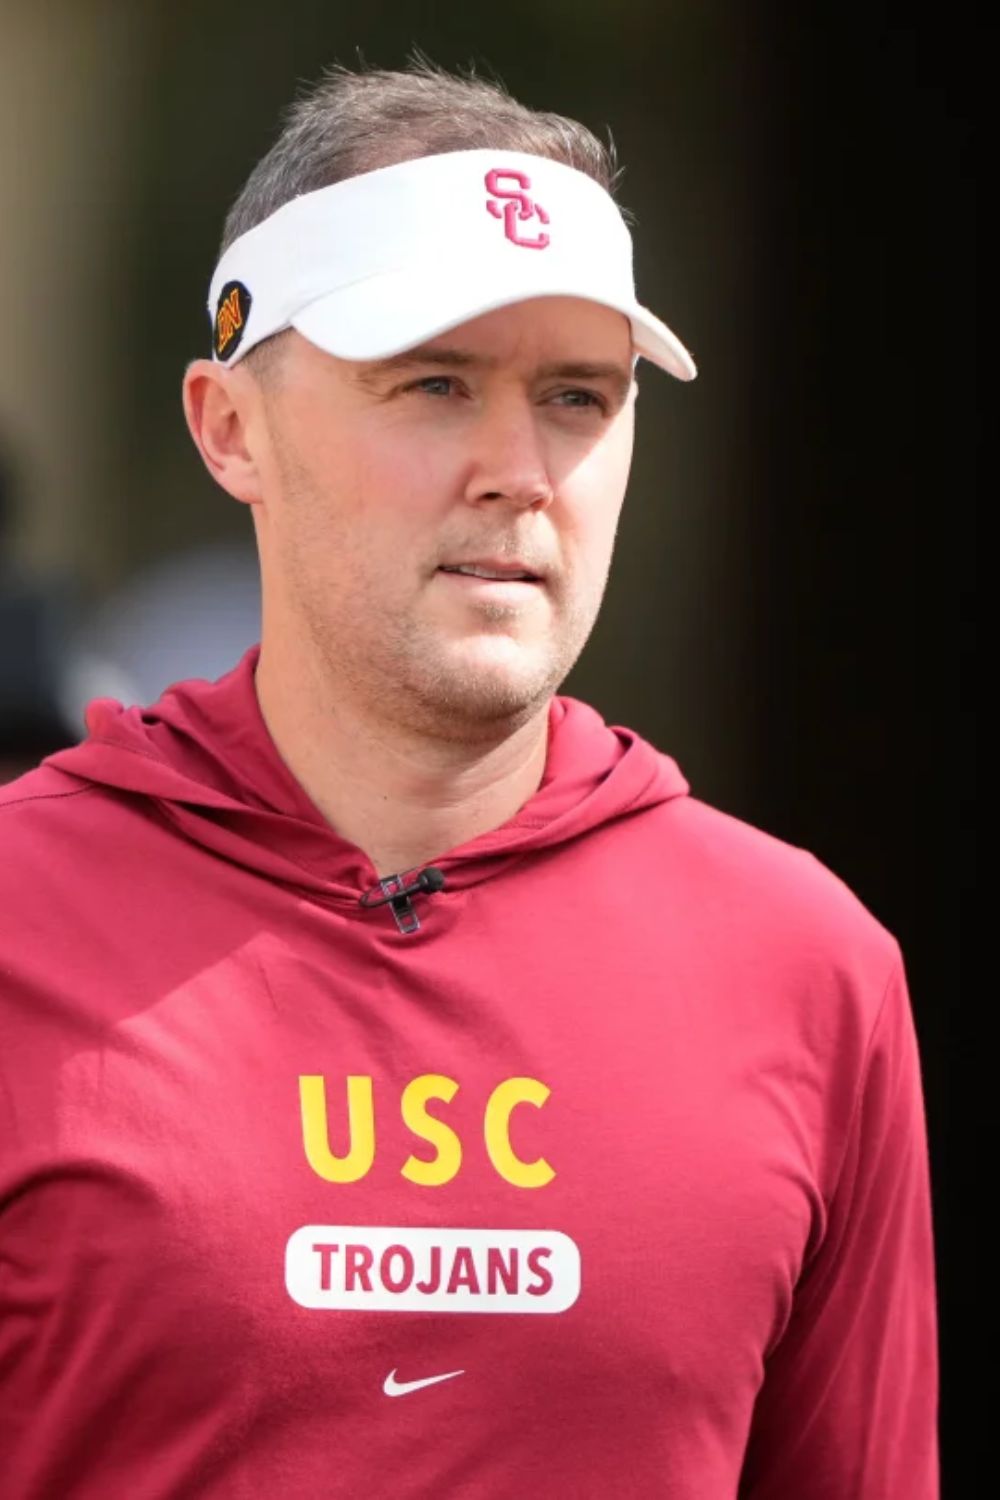 Lincoln Riley Is The 30th Head Coach Of The USC Trojans Football Program